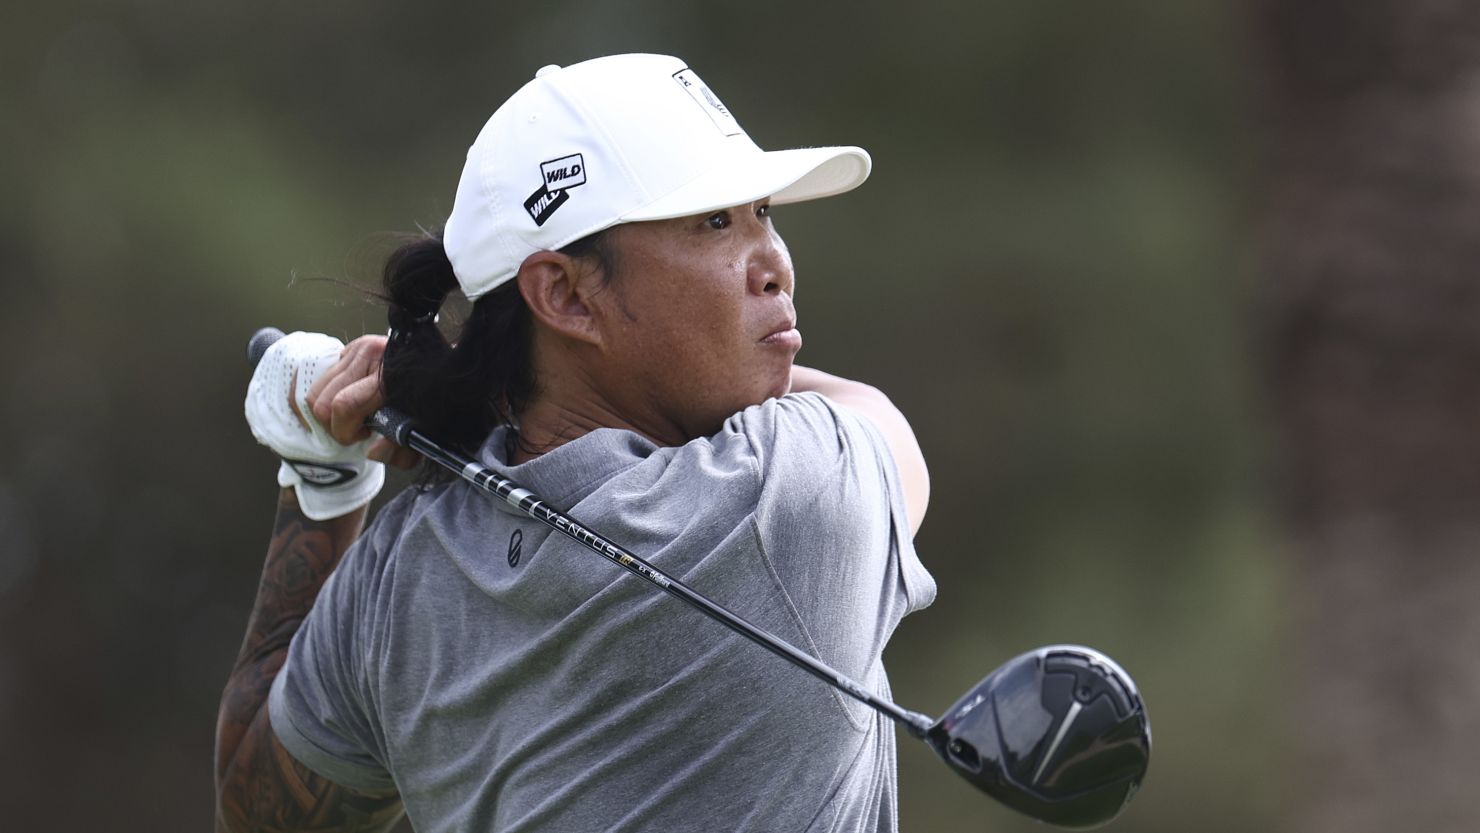 Anthony Kim had been away from golf for 12 years until his return earlier this year.